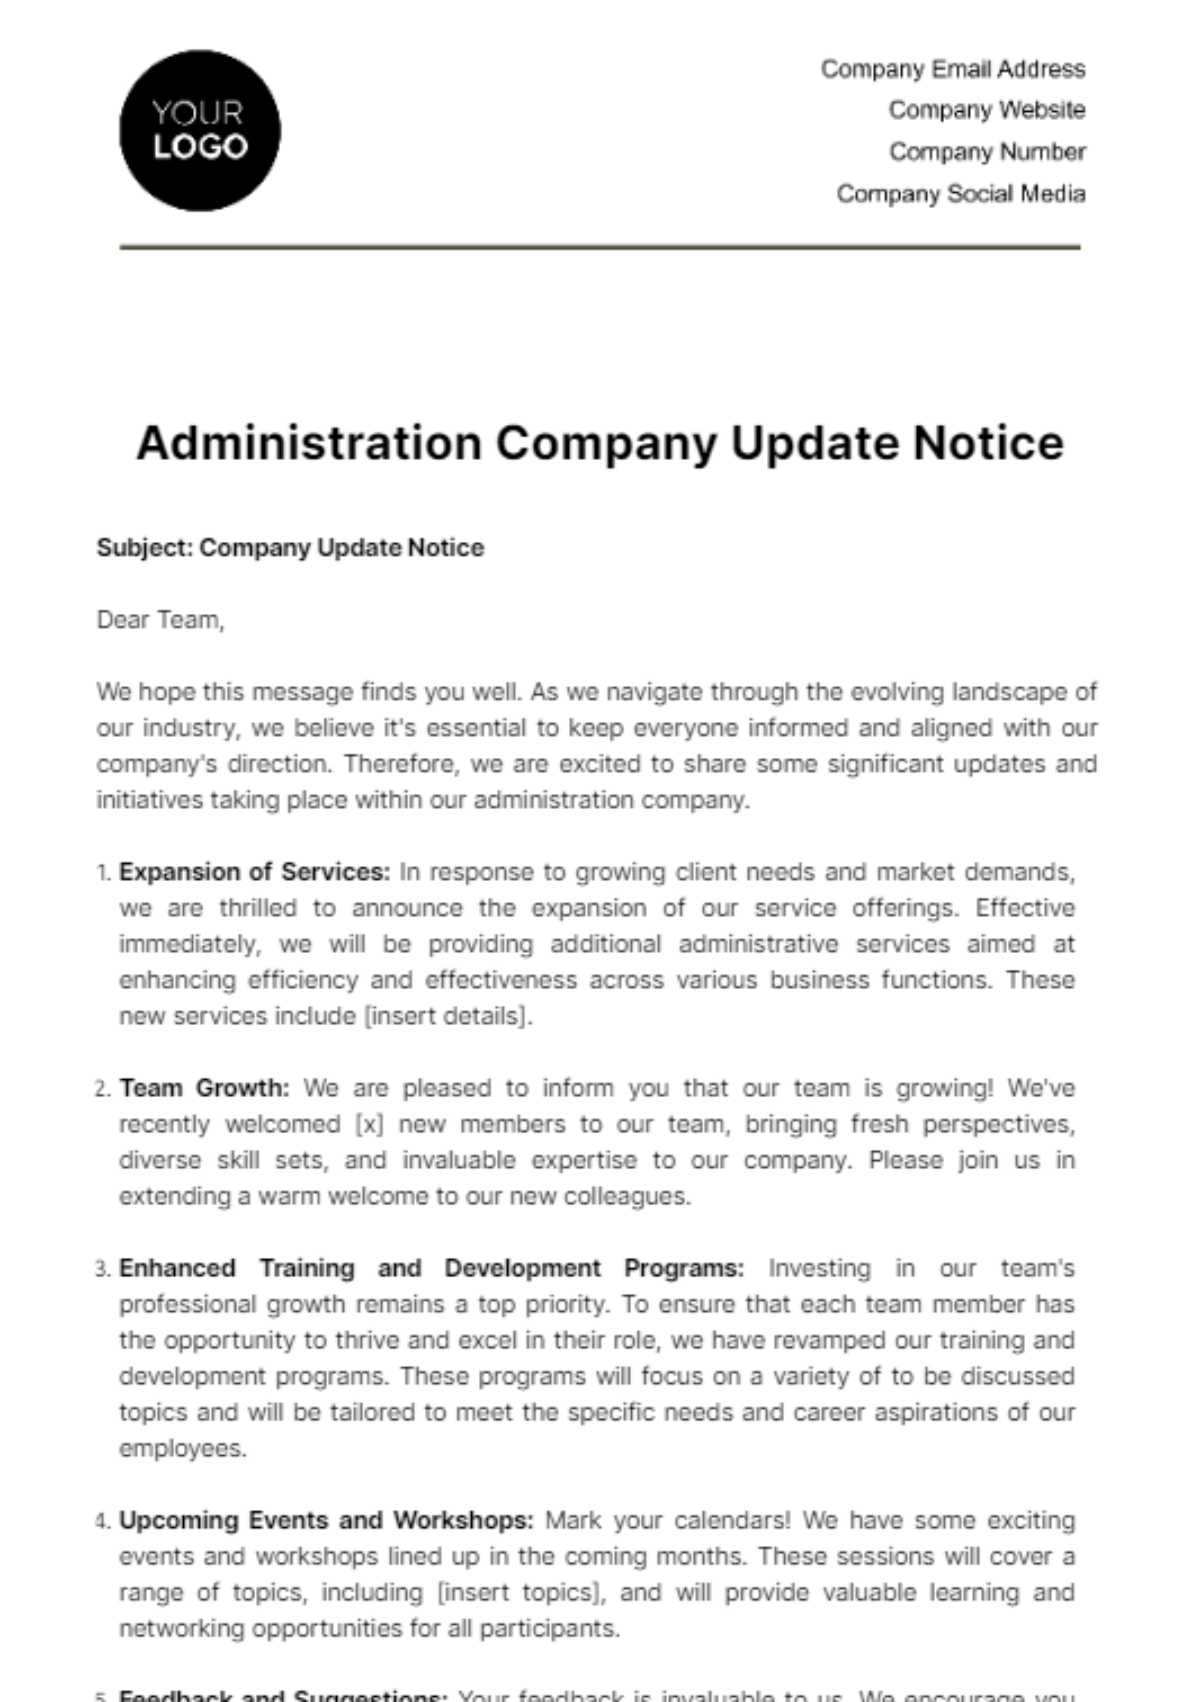 Free Administration Company Update Notice Template